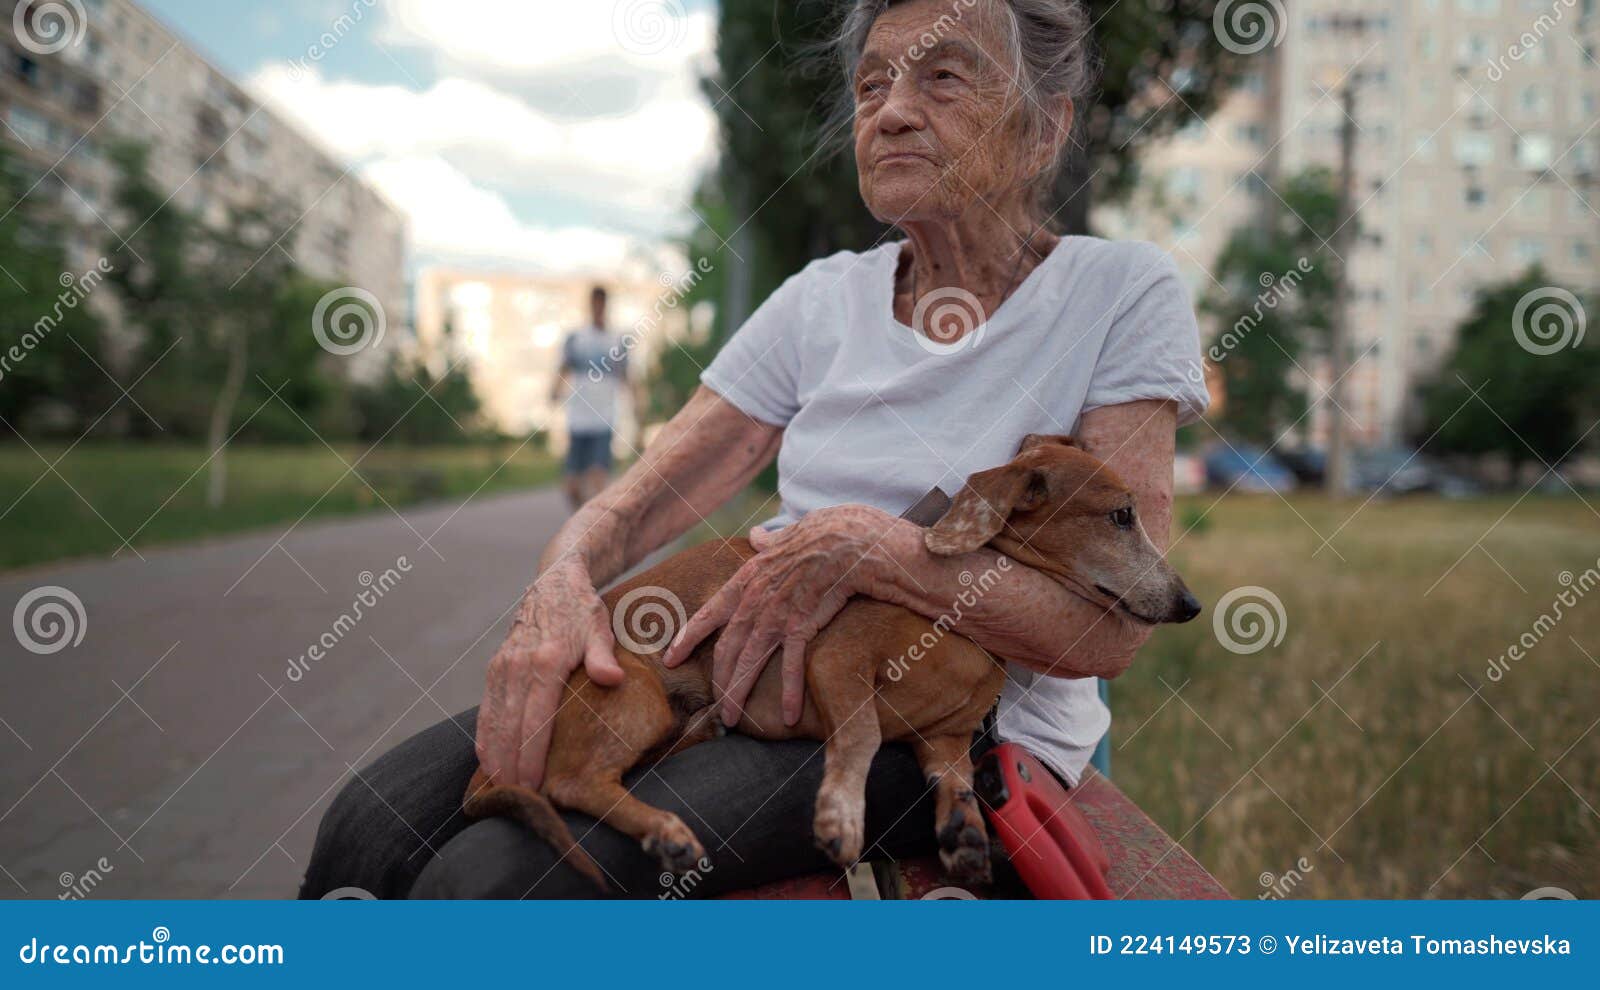 animal theme is a lonely old woman best friend. caucasian 90 years old senior female is happy to spend time with her pet